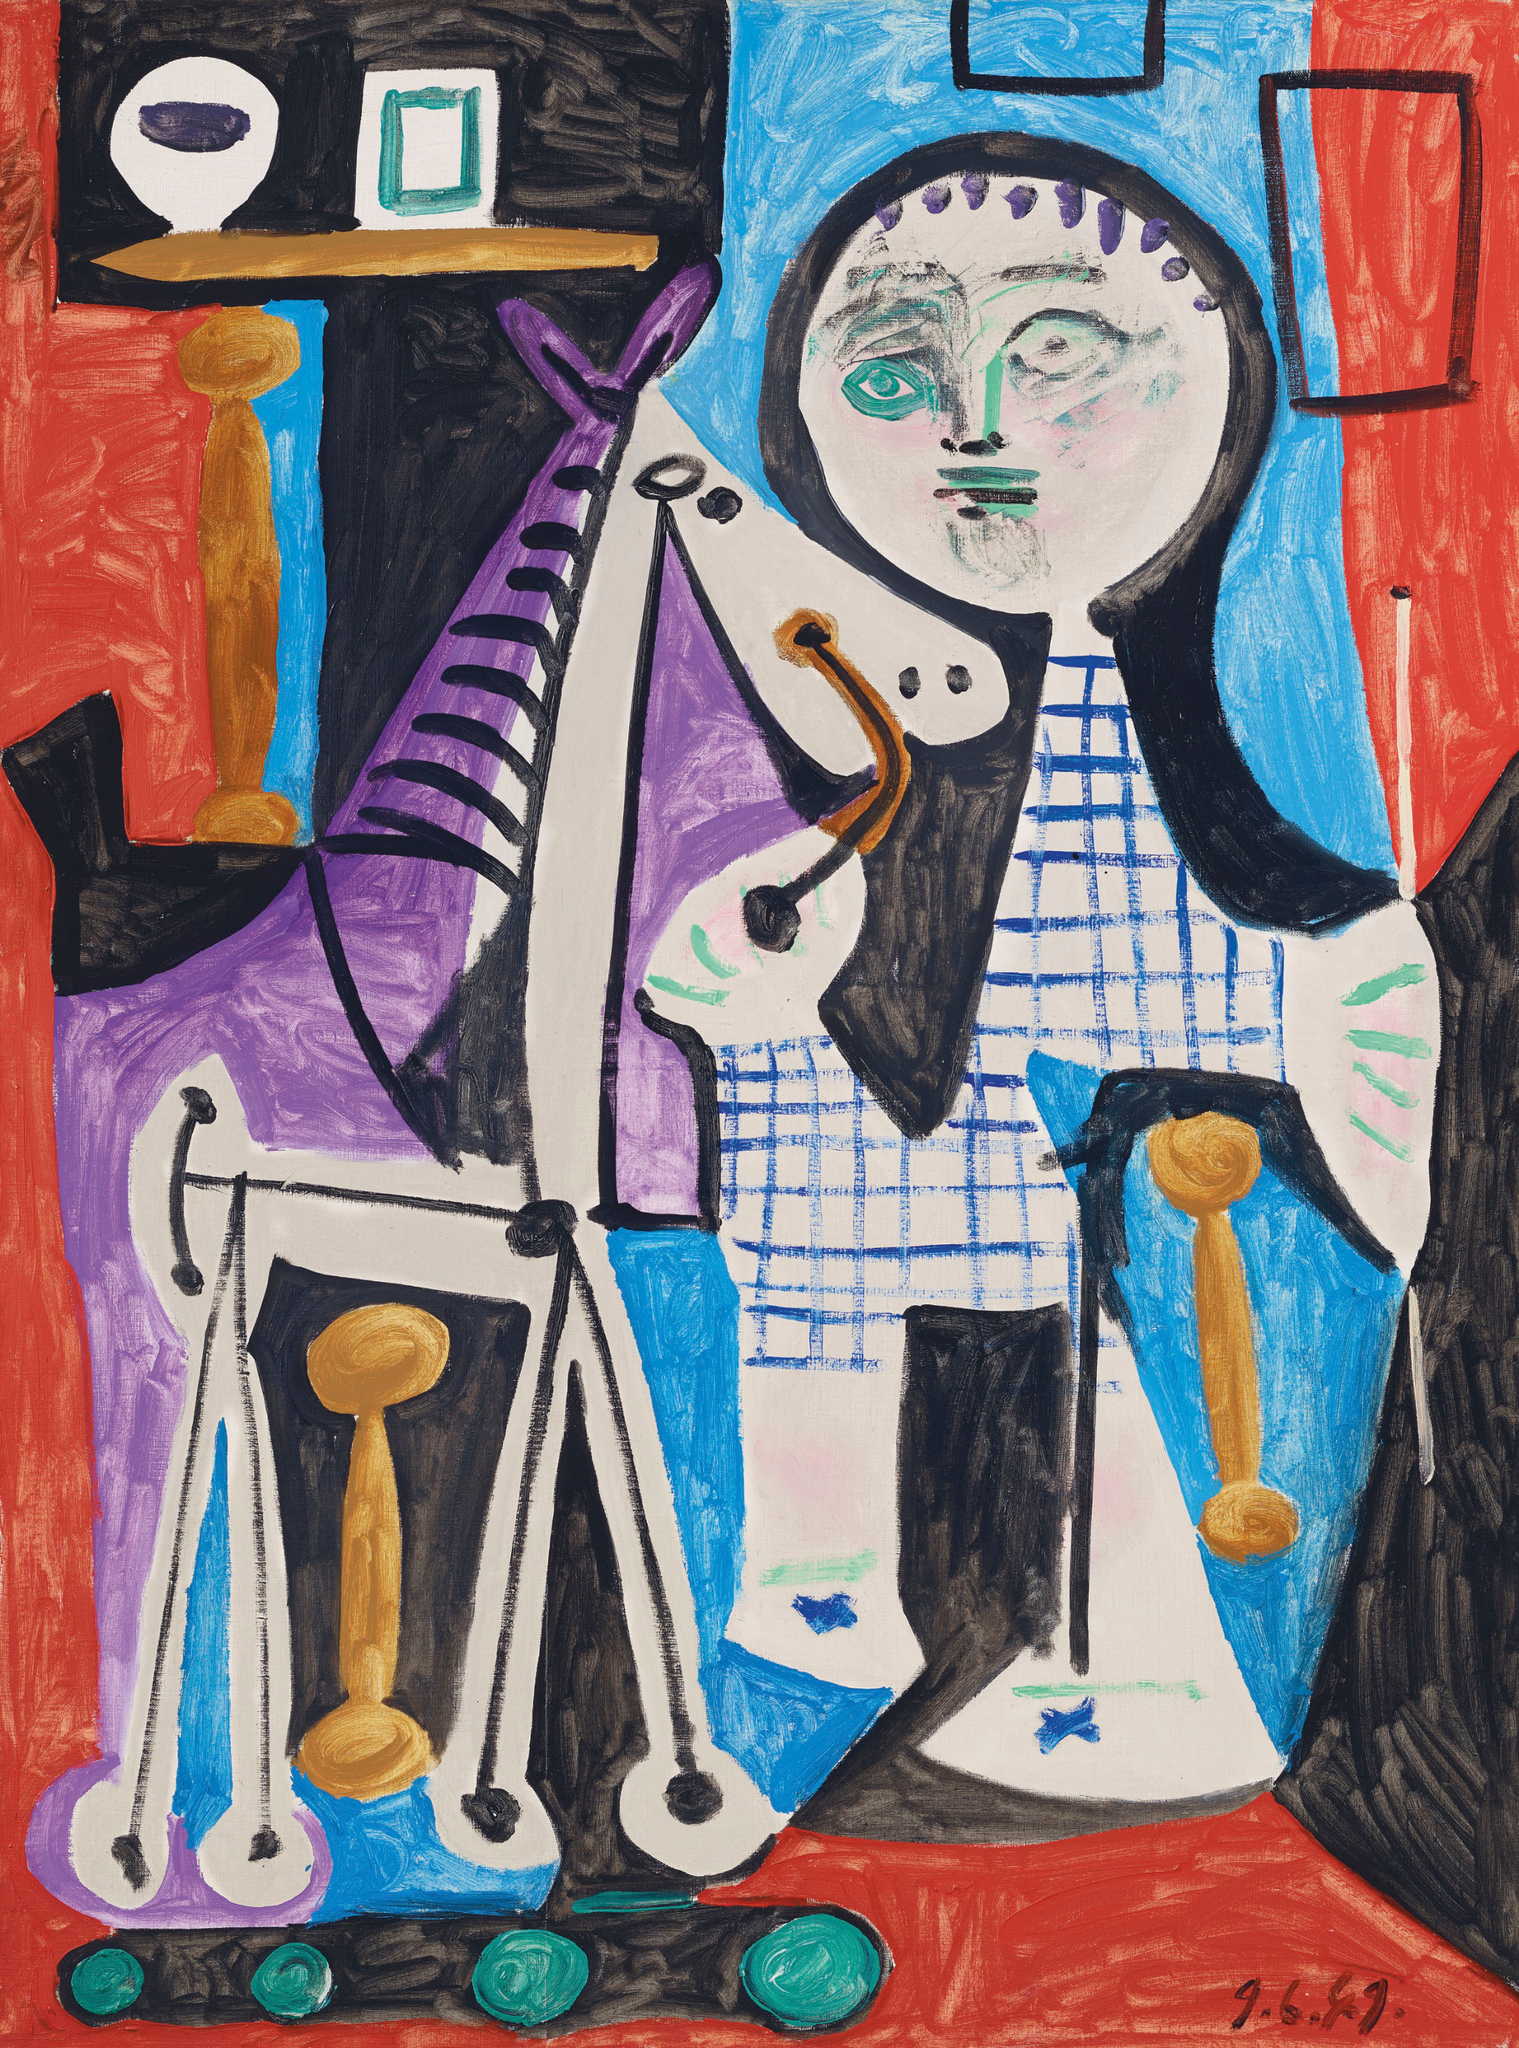 Child with a toy horse (Paulo), 1923 by Pablo Picasso: History, Analysis &  Facts